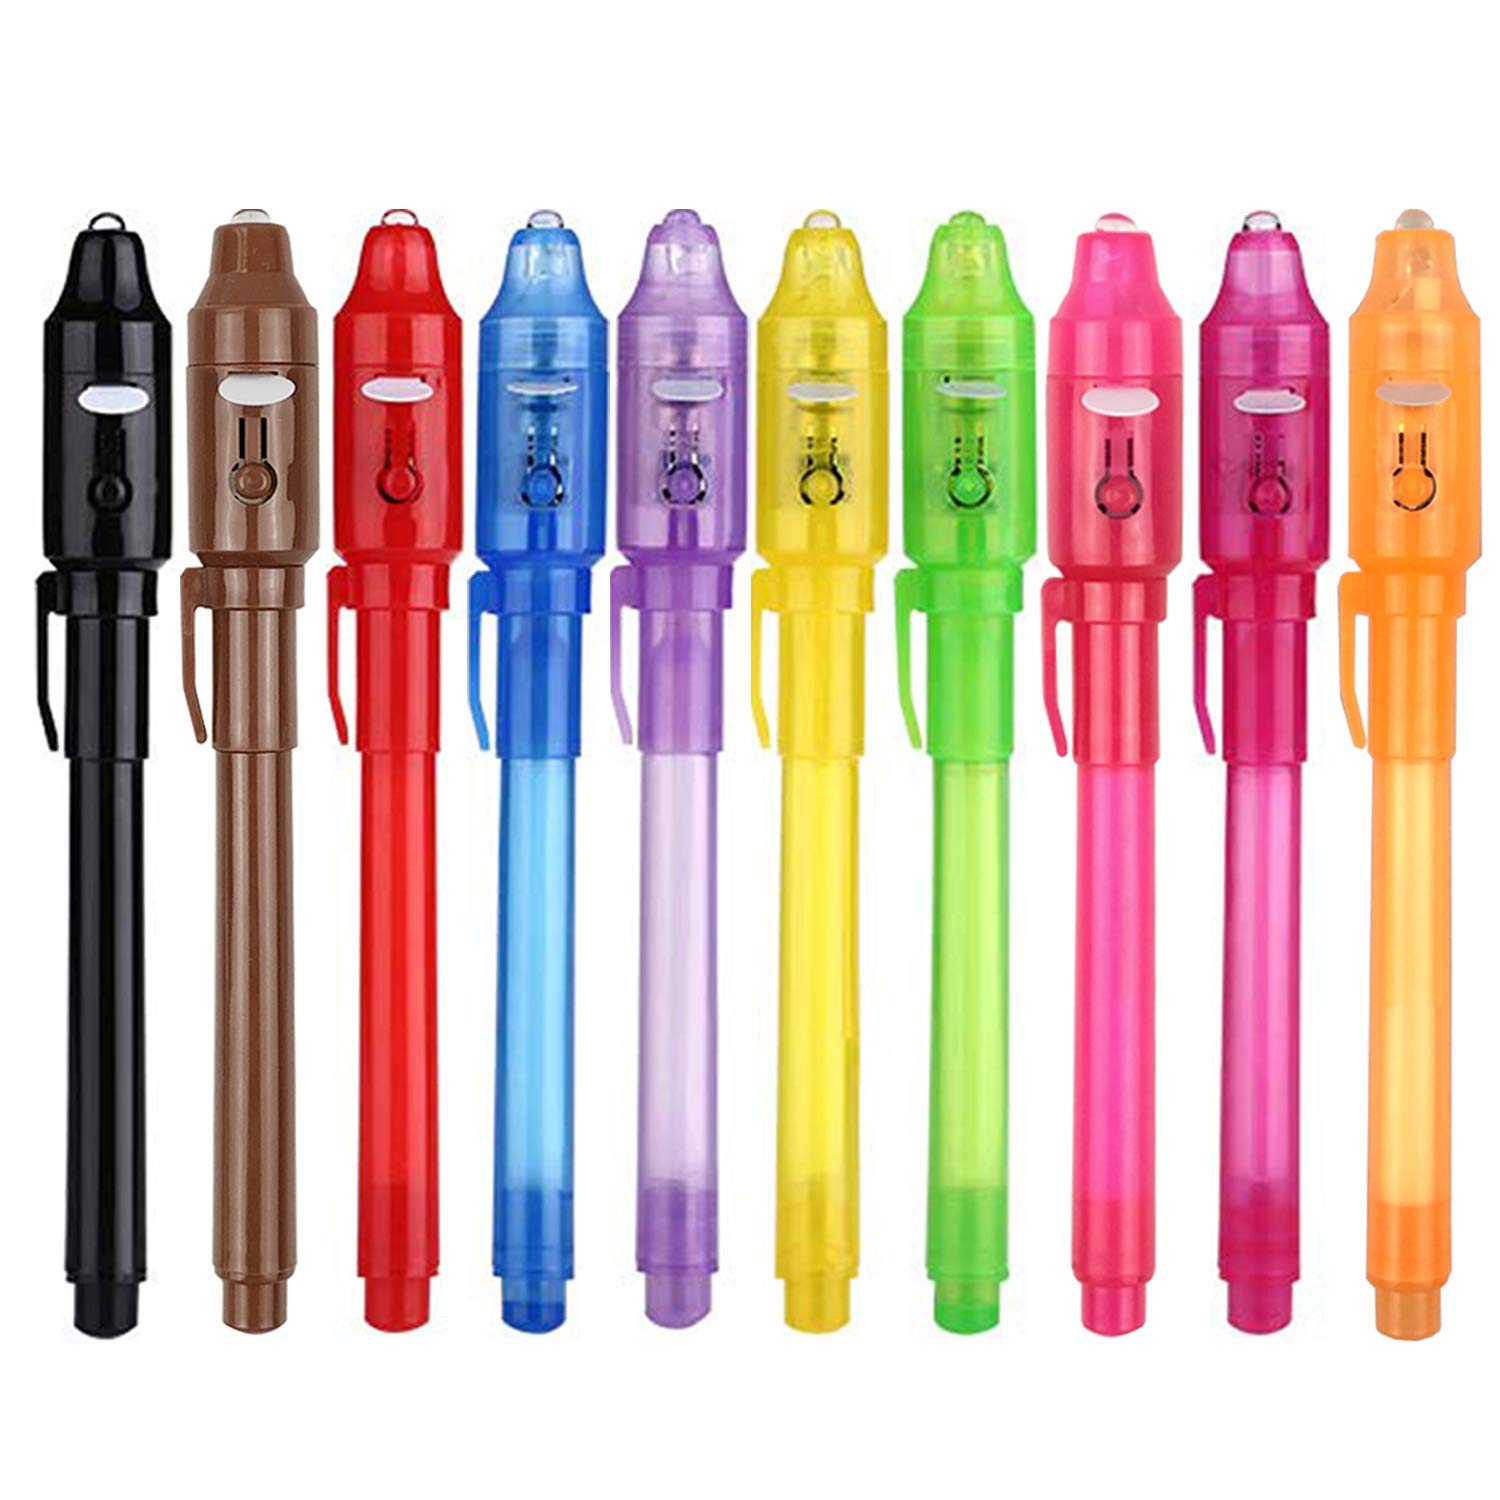 SCStyle Invisible Ink Pen 10Pcs Latest Spy Pen with uv Light Magic Spy Marker Kid Pens for Secret Message and Birthday Party,Wri